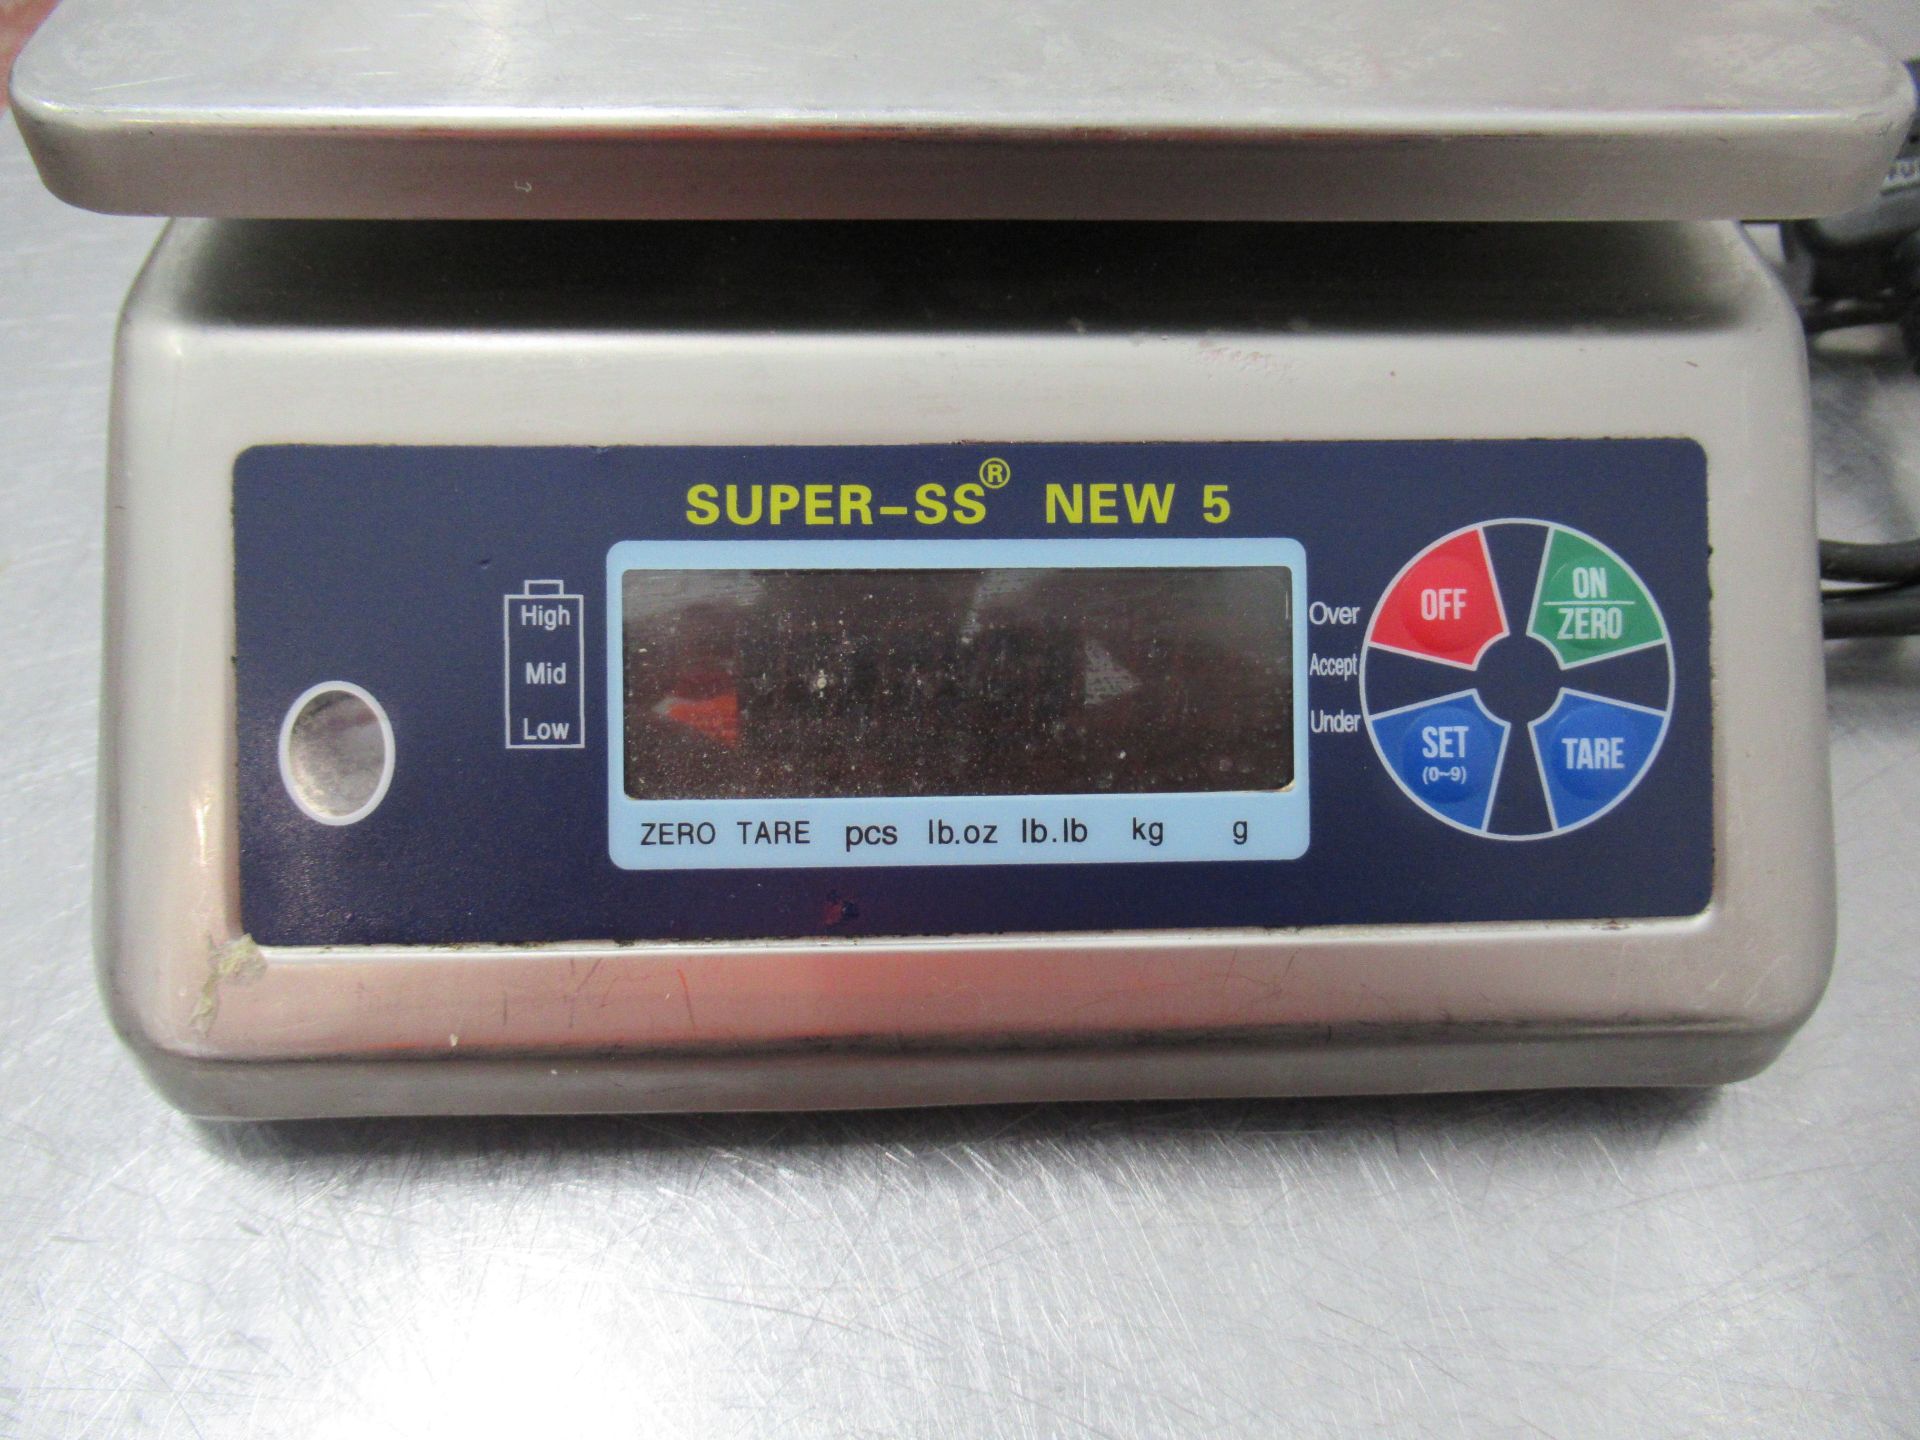 Super-SS New5 digital weigh scale Serial no. 2103001, 3kg x 1.0g, platform dimensions 225mm x - Image 2 of 5